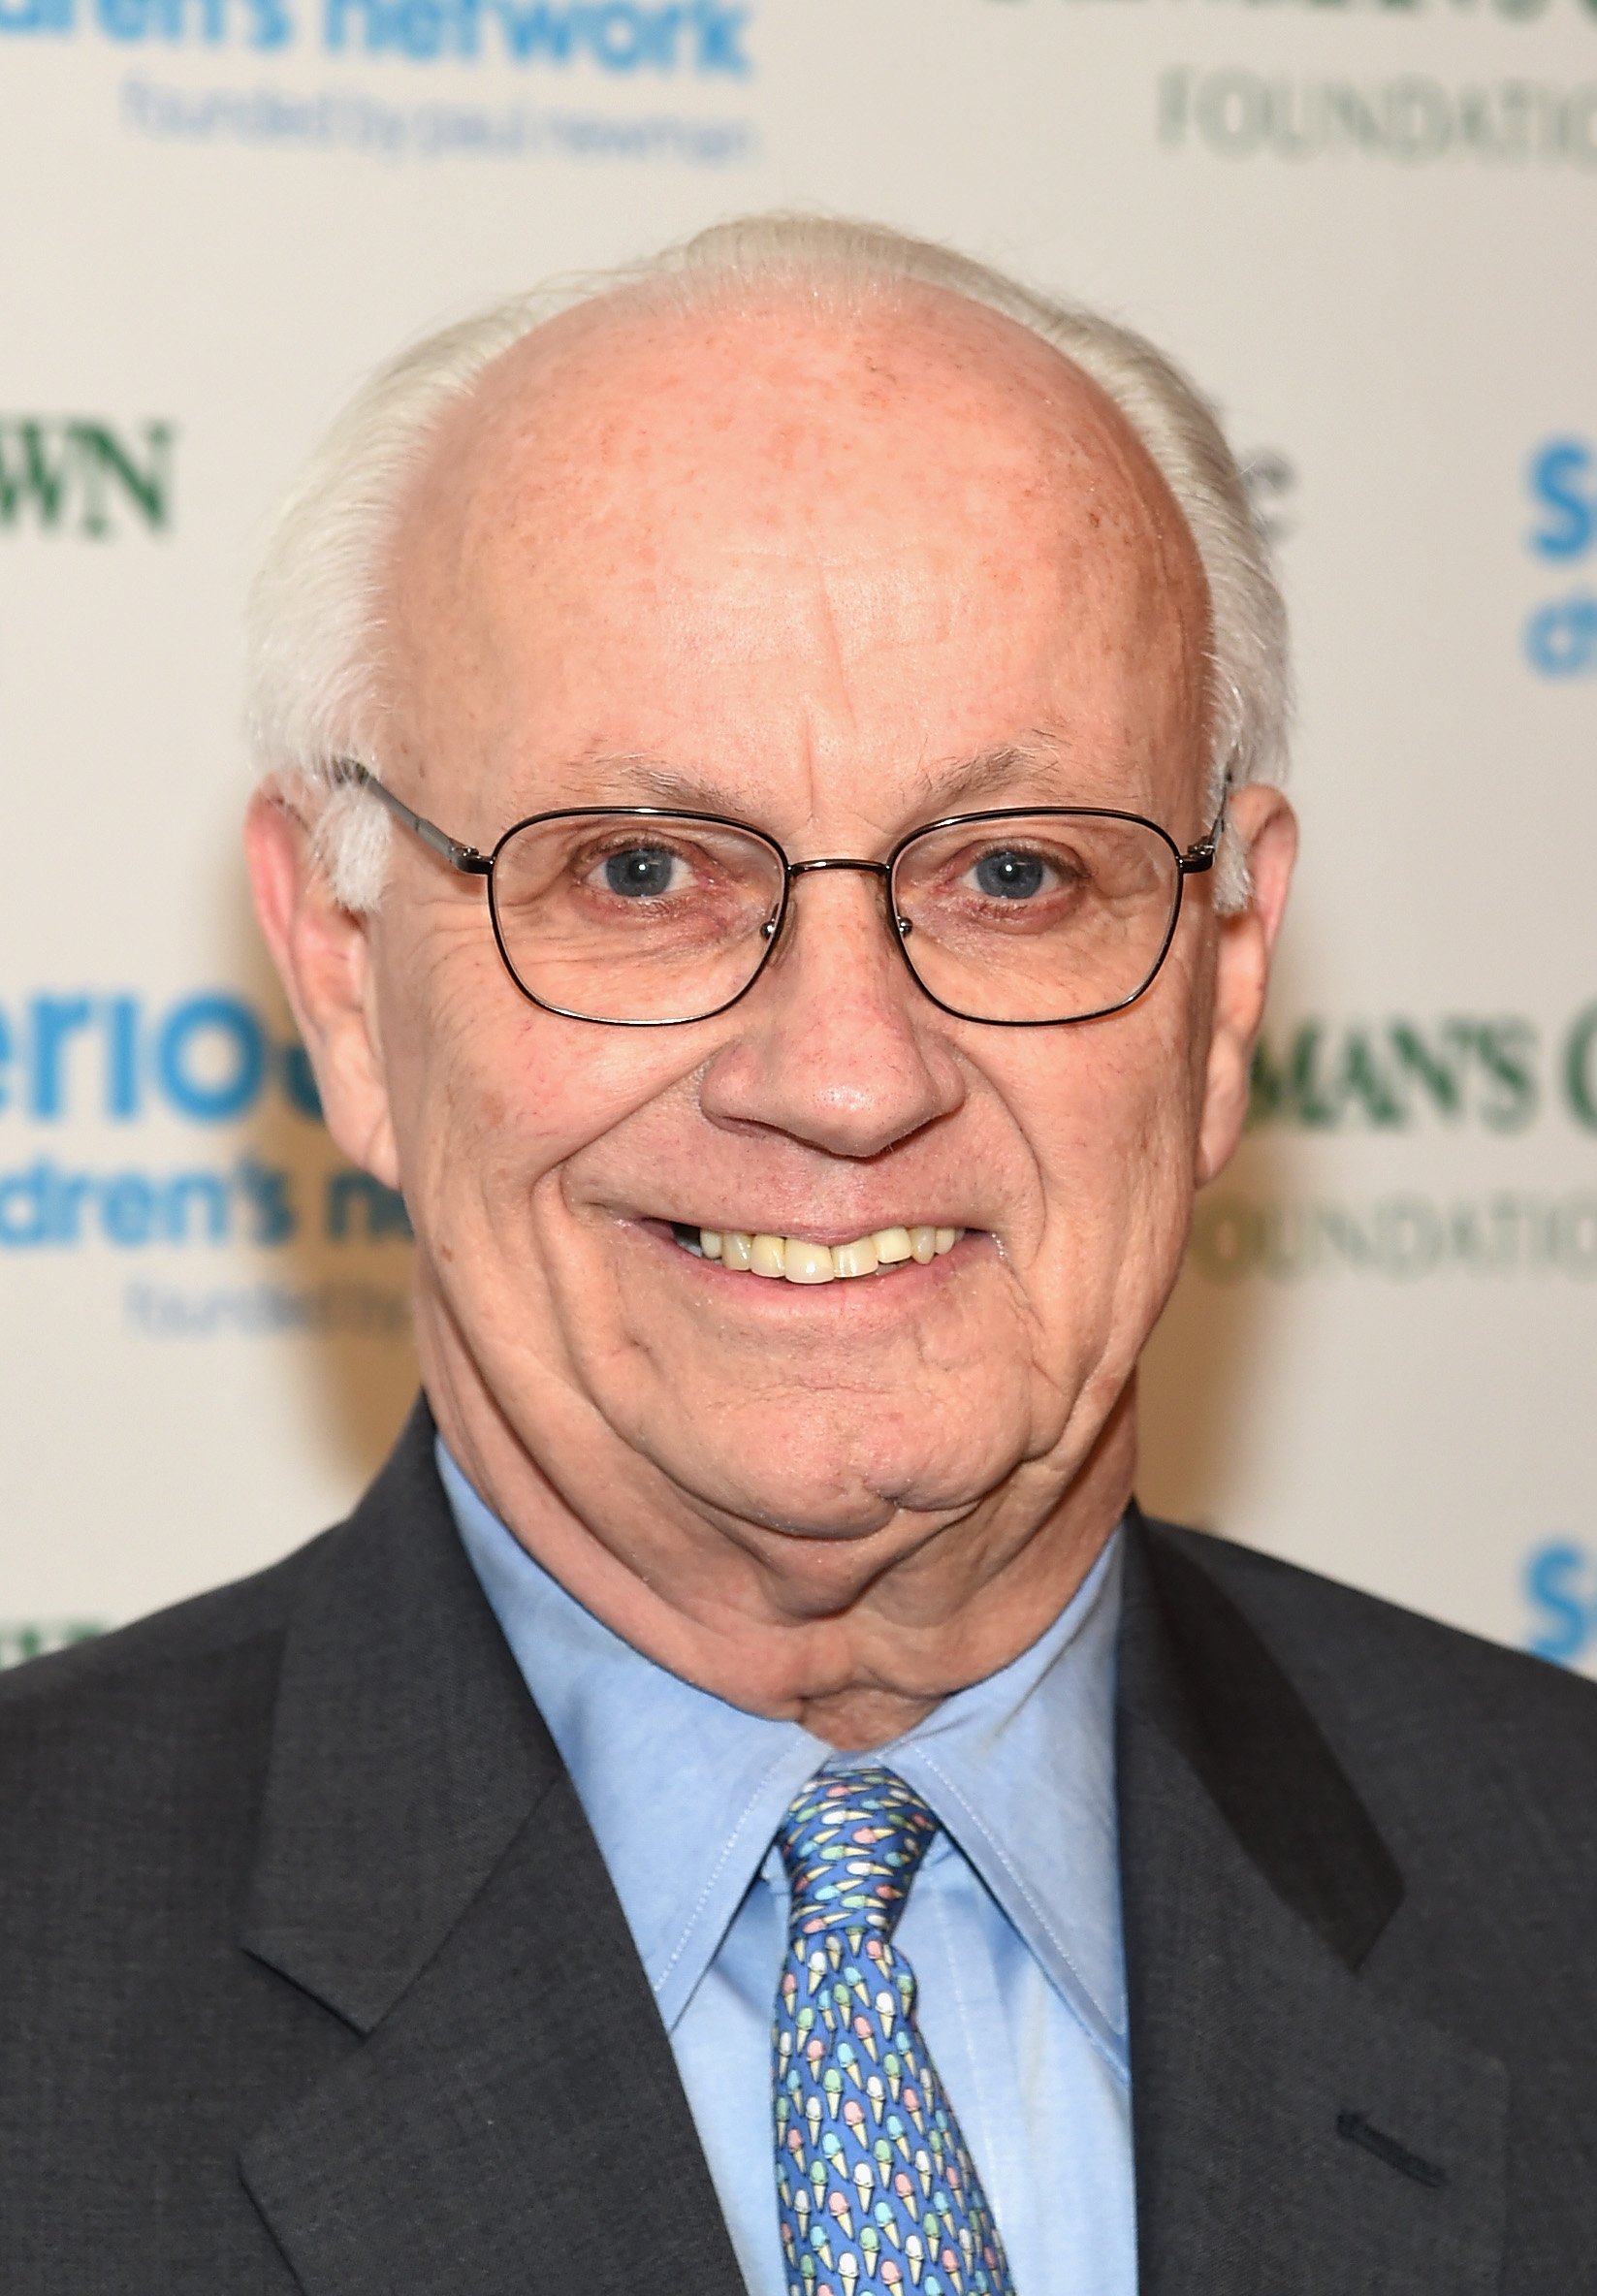 Newman's Own President and CEO Bob Forrester during SeriousFun Children's Network's New York City Gala at Avery Fisher Hall at Lincoln Center on March 2, 2015 in New York City. / Source: Getty mages